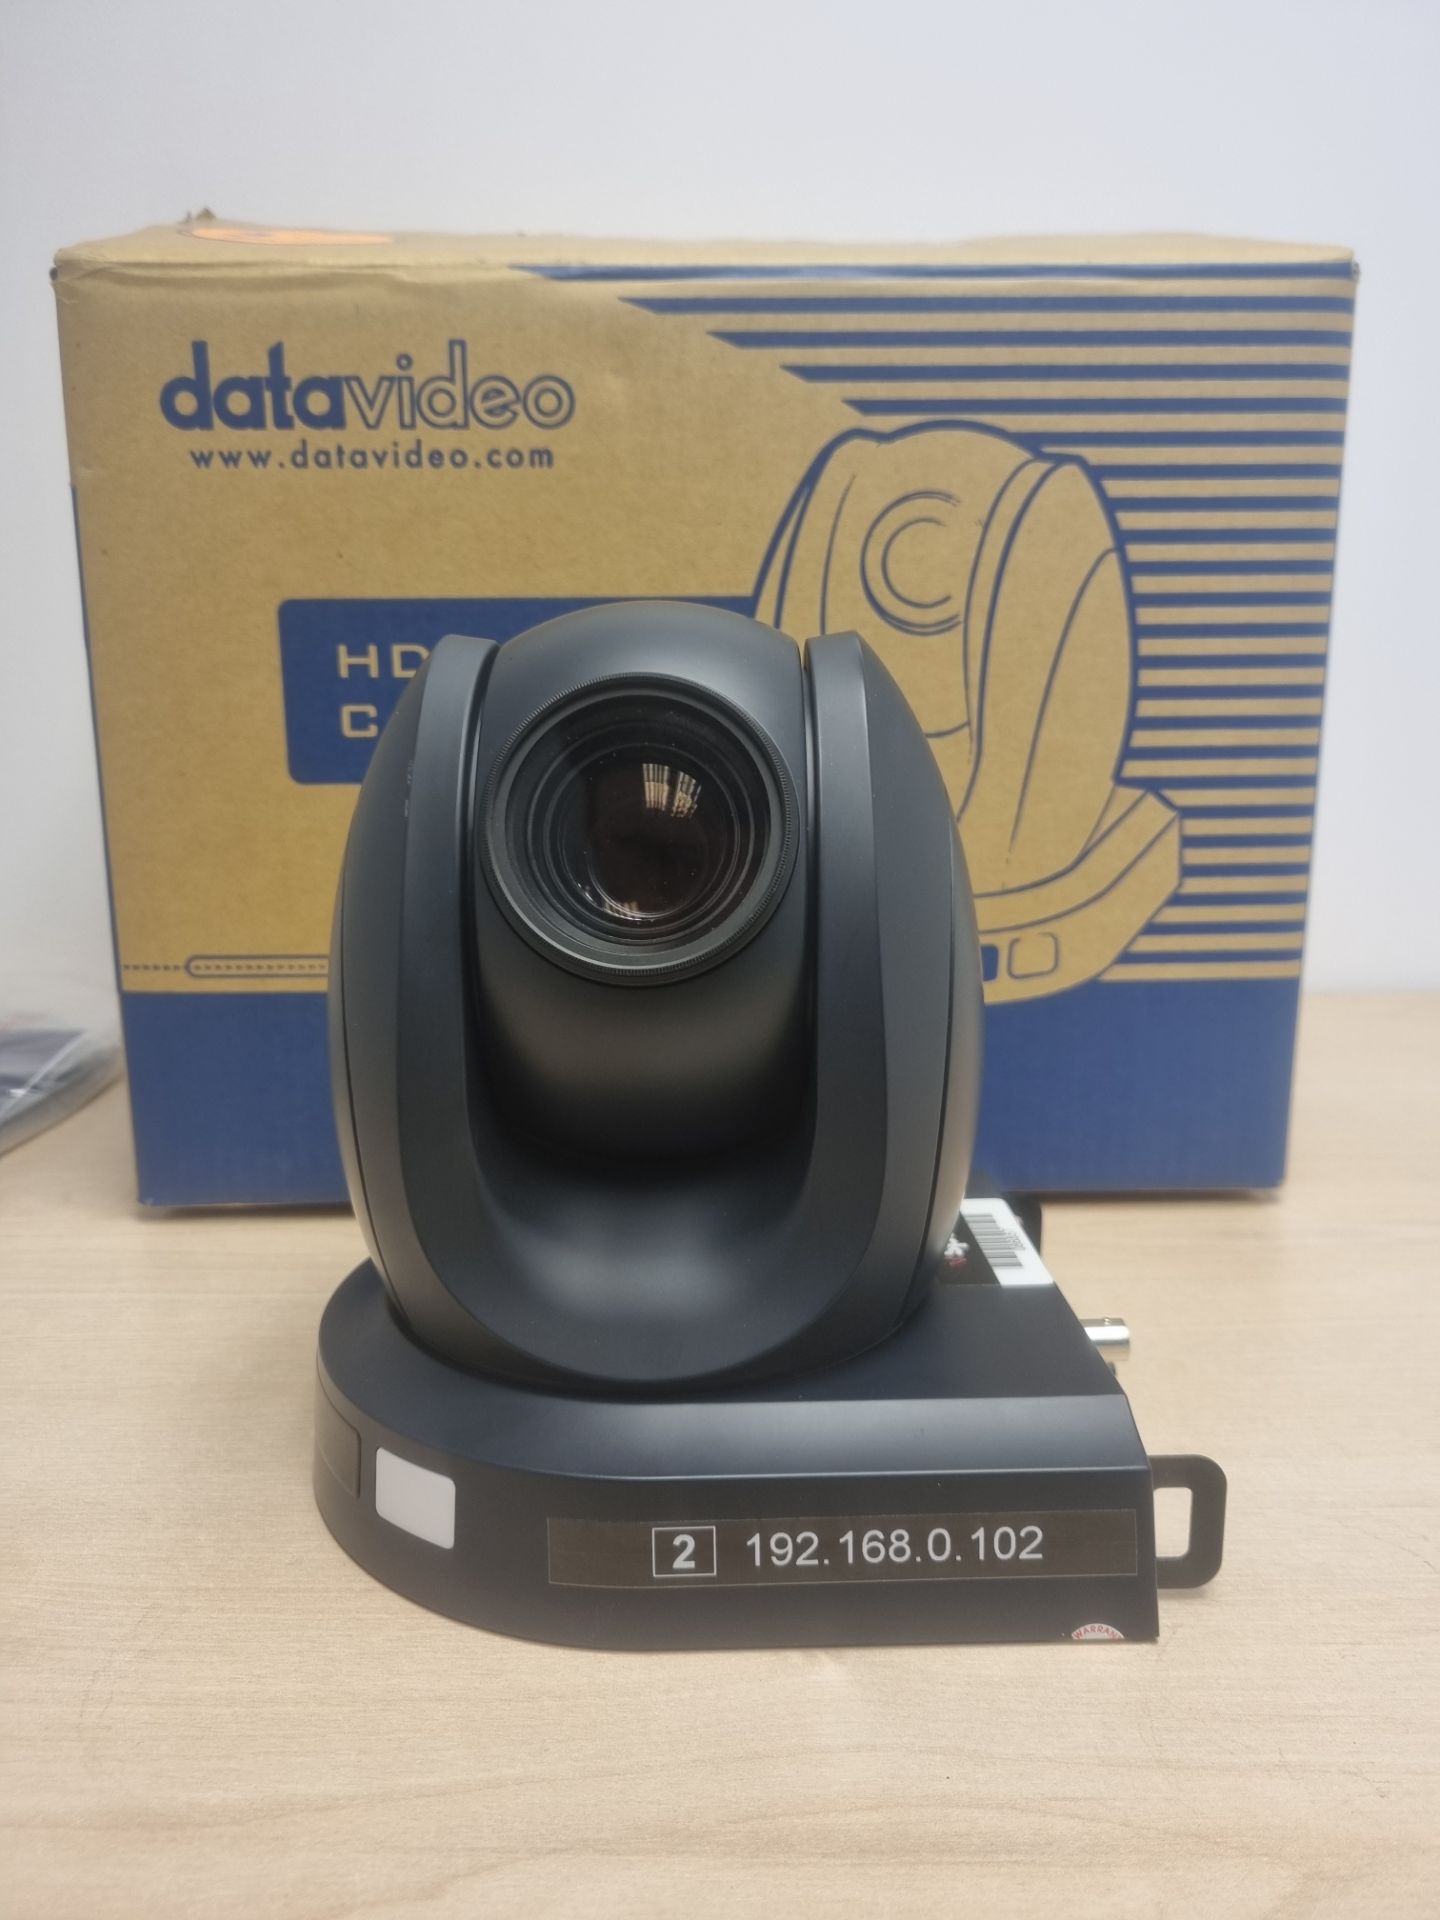 25 x DataVideo PTC-140 HD PTZ IP streaming camera, tested and working, STOCK IMAGE - Image 2 of 11